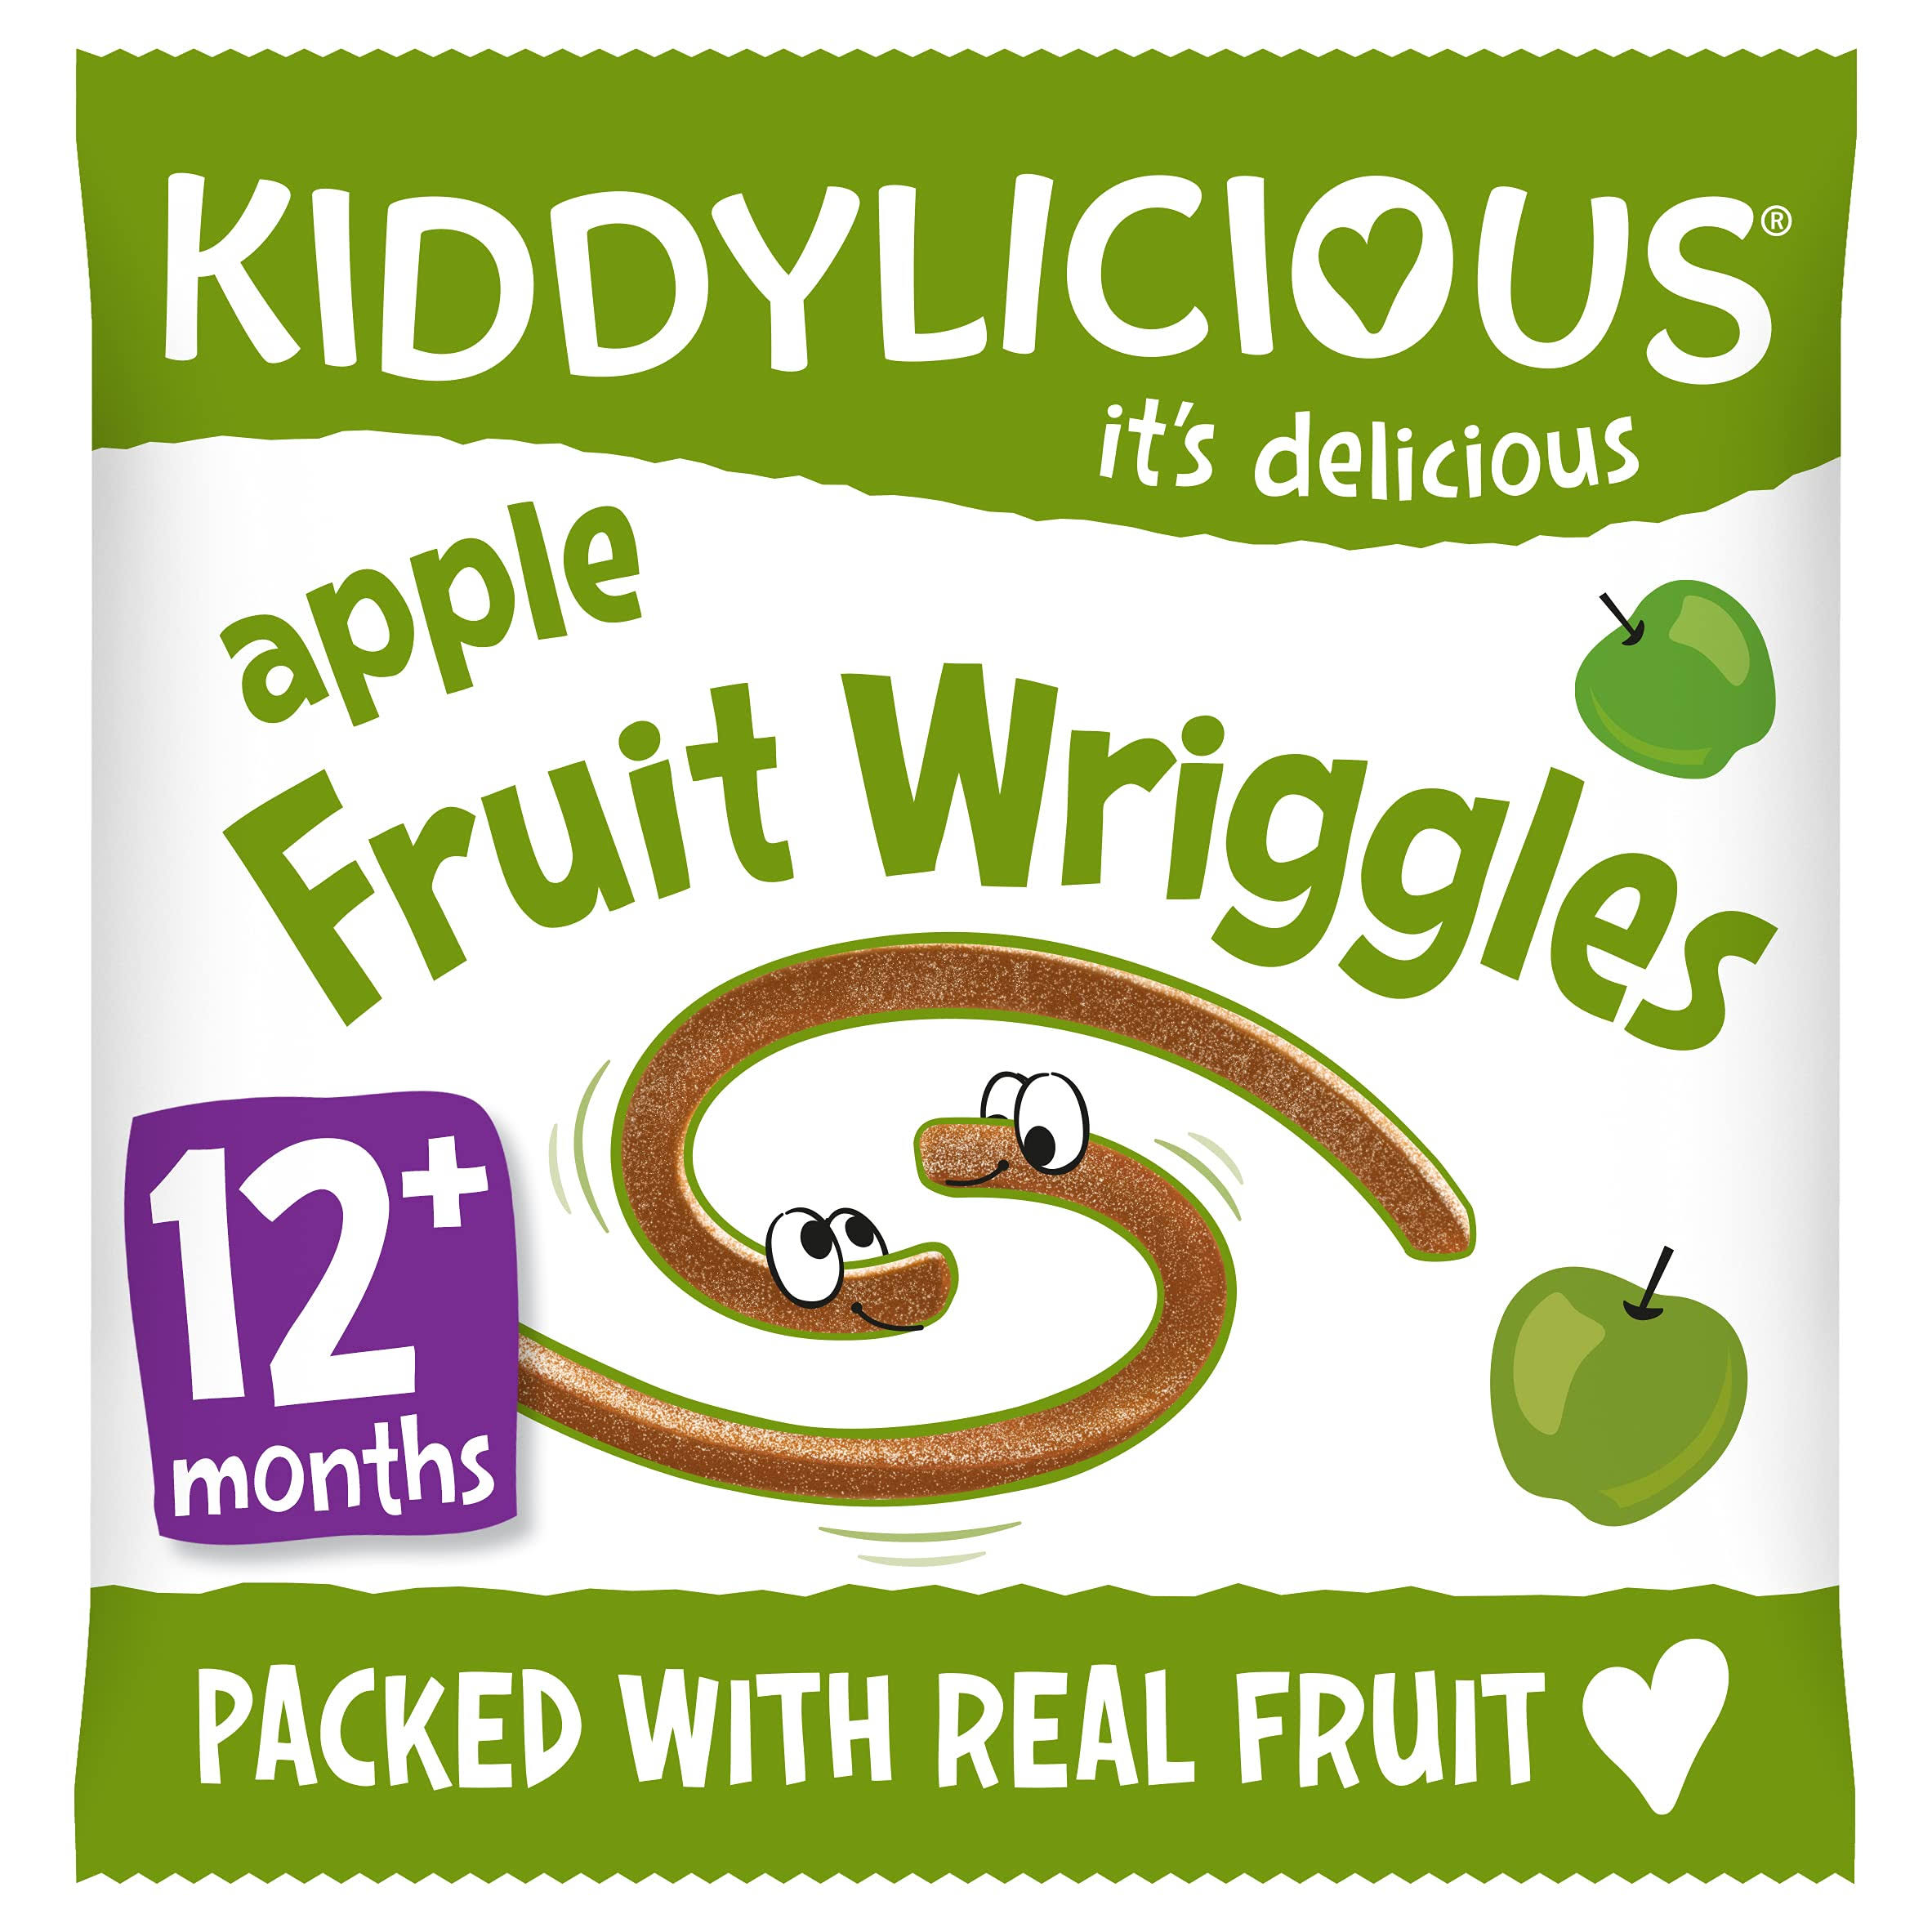 Kiddylicious Apple Fruit Wriggles 12g 12 Months